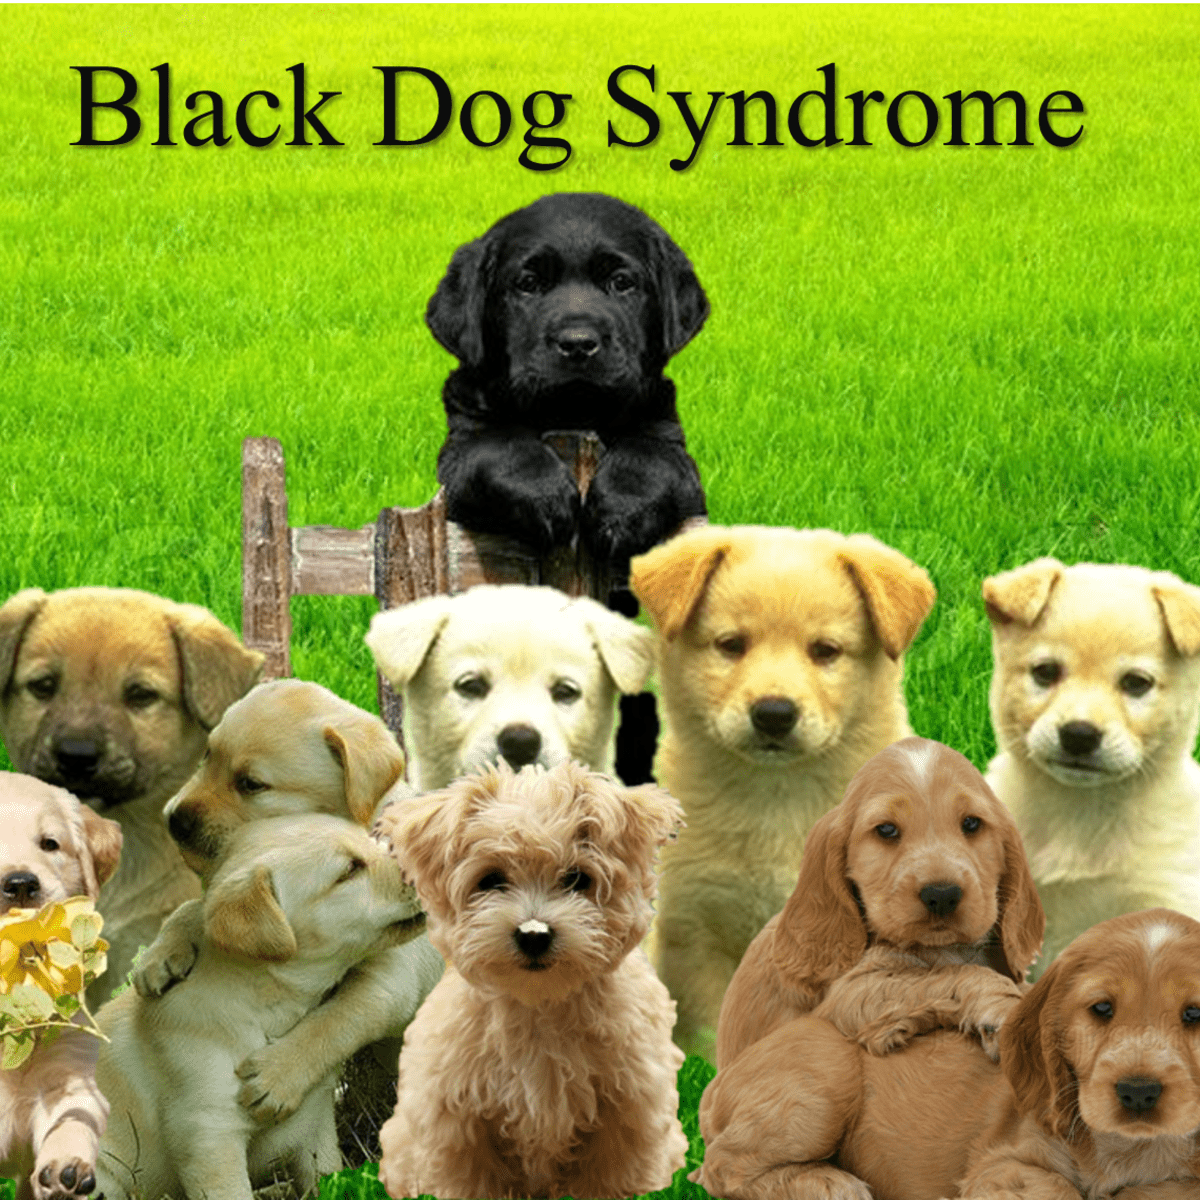 why are people afraid of black dogs